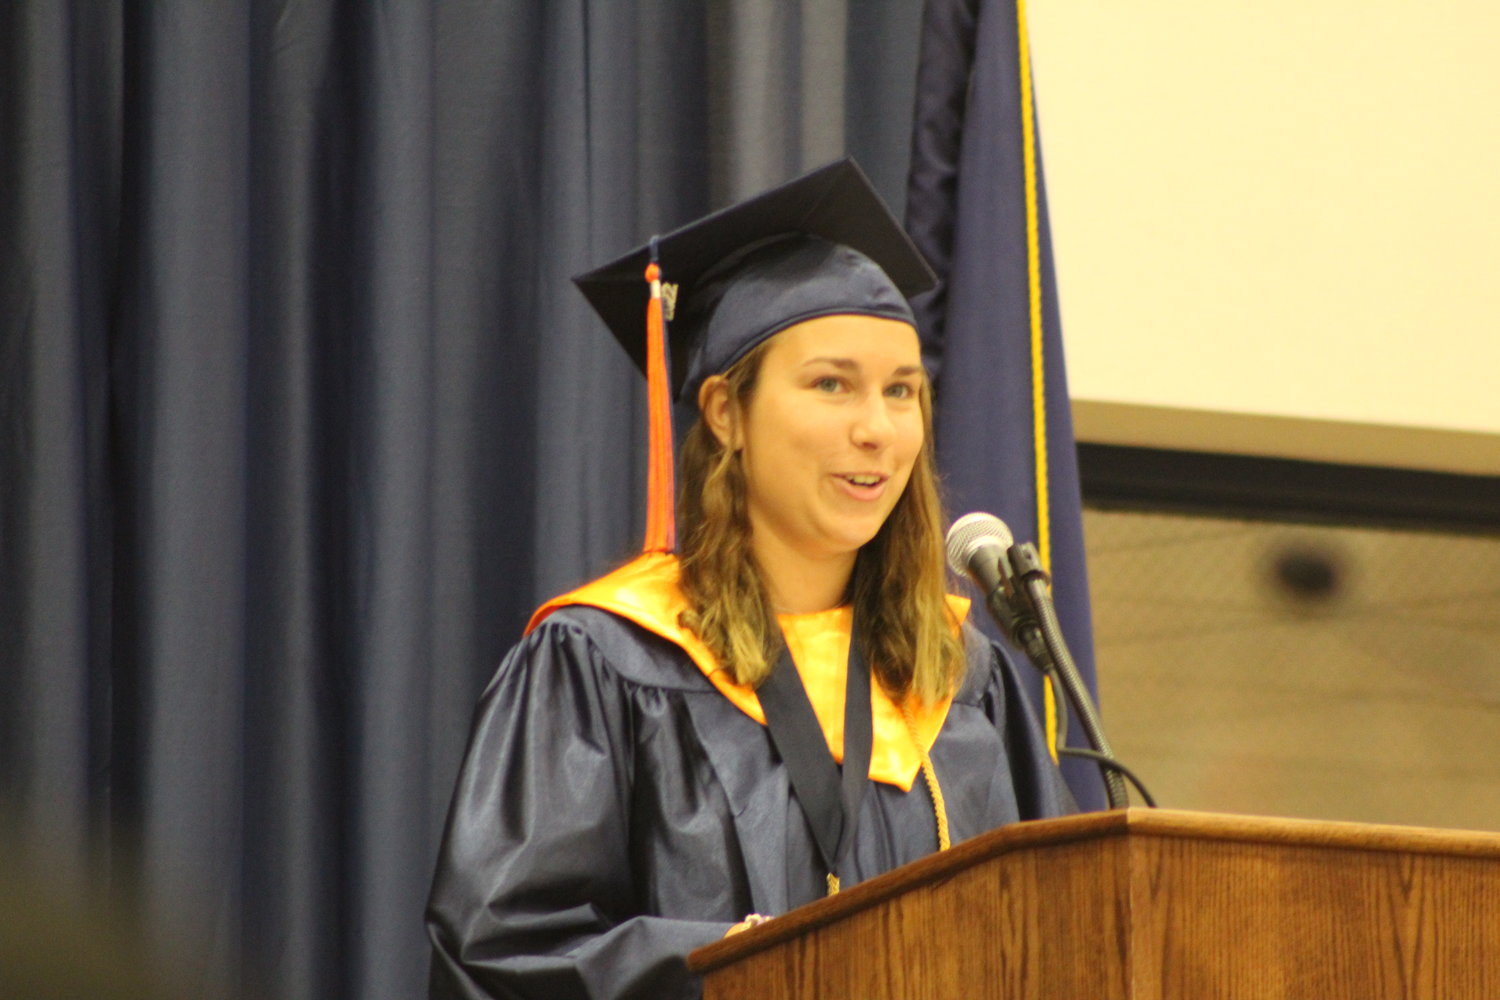 Courtney Engels gives one of the commencement addresses to her fellow graduates.